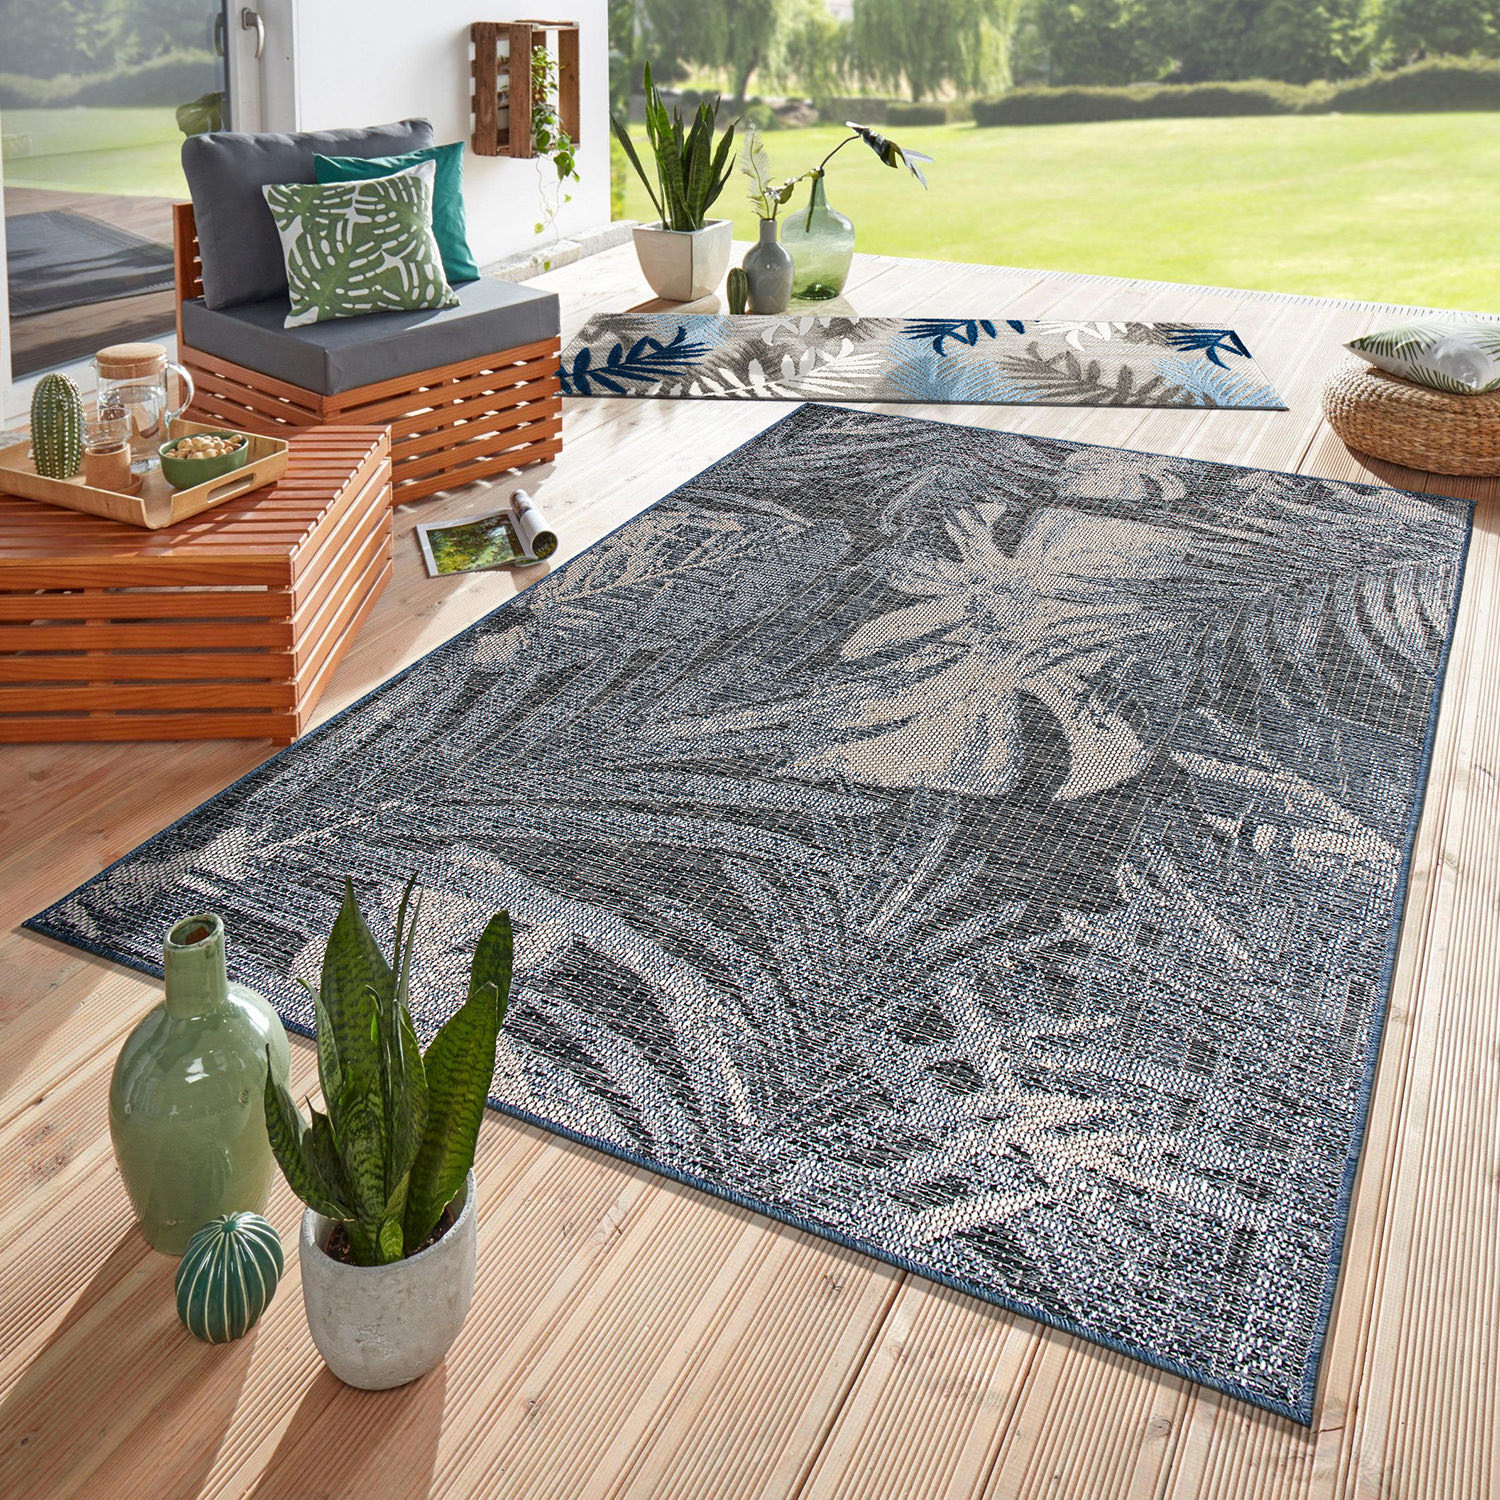 World Rug Gallery Floral Tropical Indoor/Outdoor Area Rug - Blue 7'10 x 10